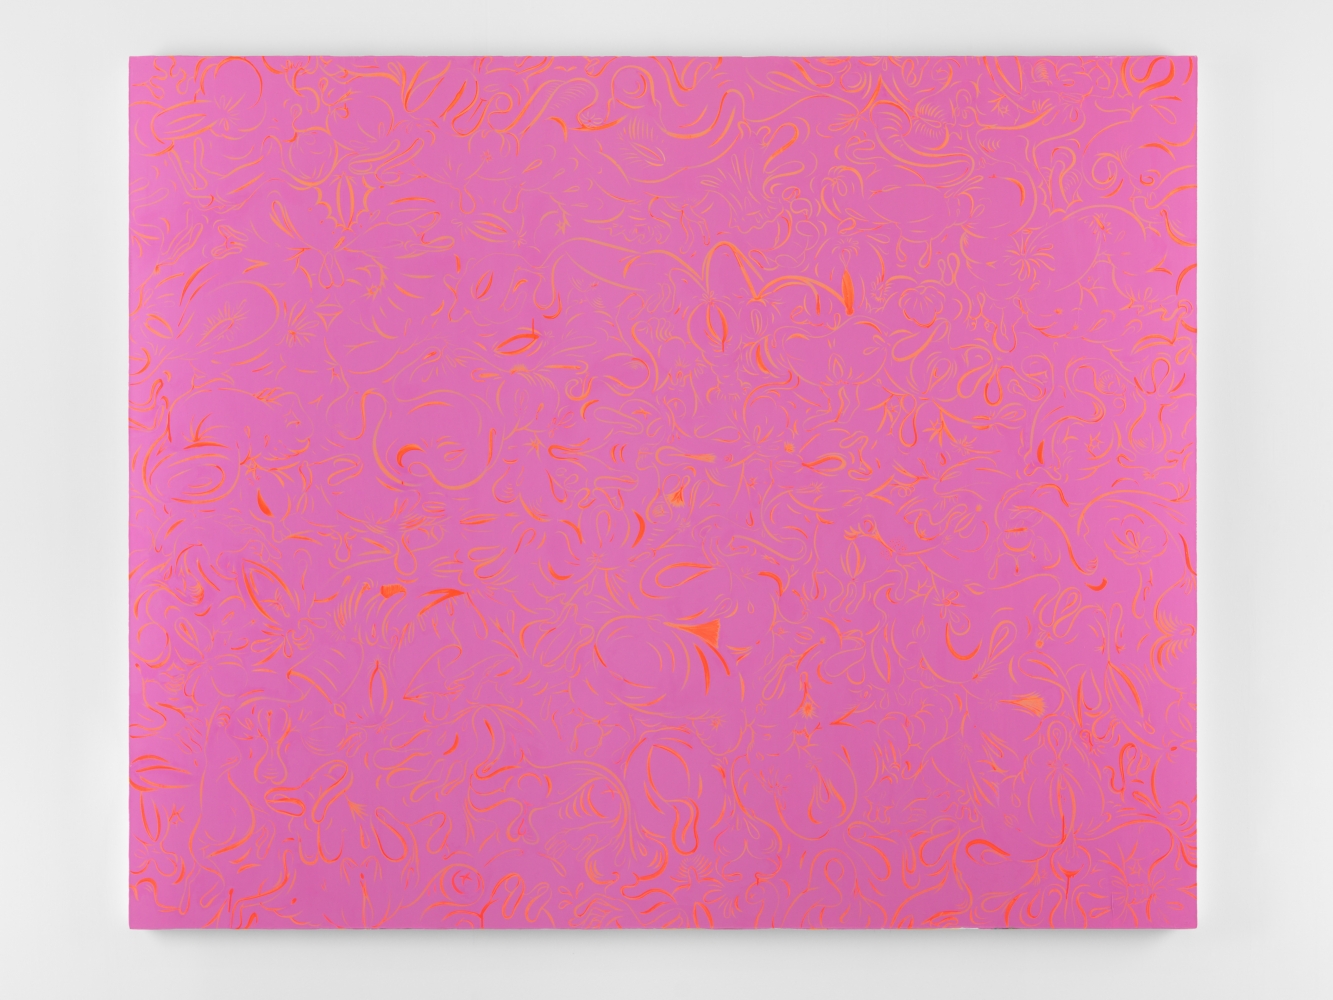 Sue Williams

Fluorescent and Flooby

2003

Oil and acrylic on canvas

84 x 104 1/4 inches (213.4 x 264.8 cm)

Signed, dated verso

SW 962

&amp;nbsp;

INQUIRE